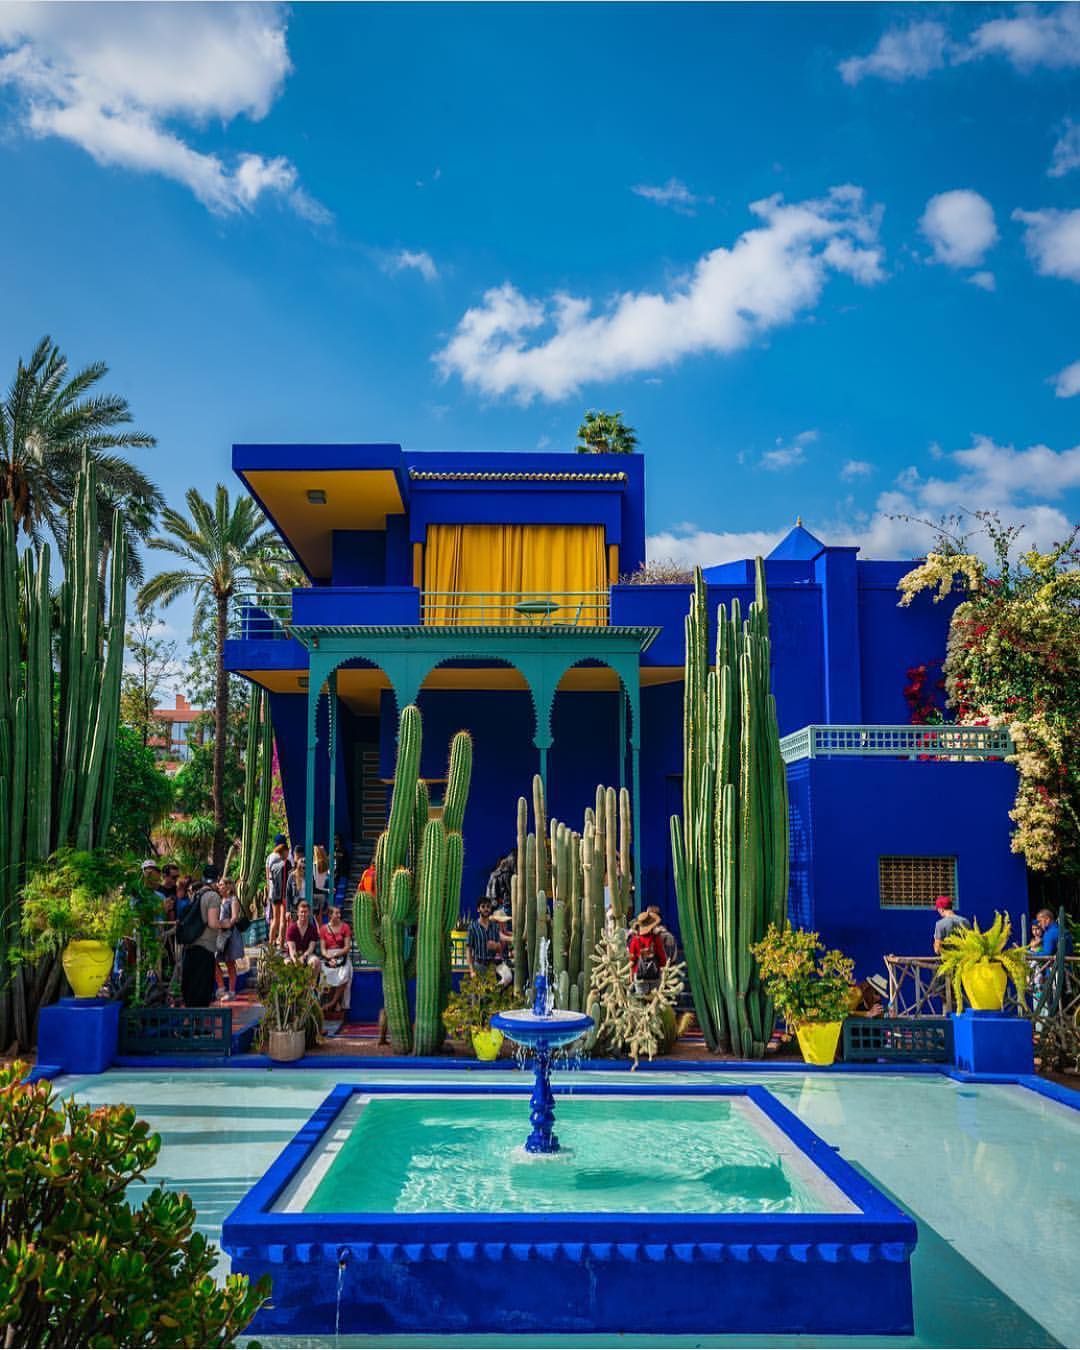 Jardin Menara Génial A Little Moroccan Beauty for This Amazing Day ðð¼ðða